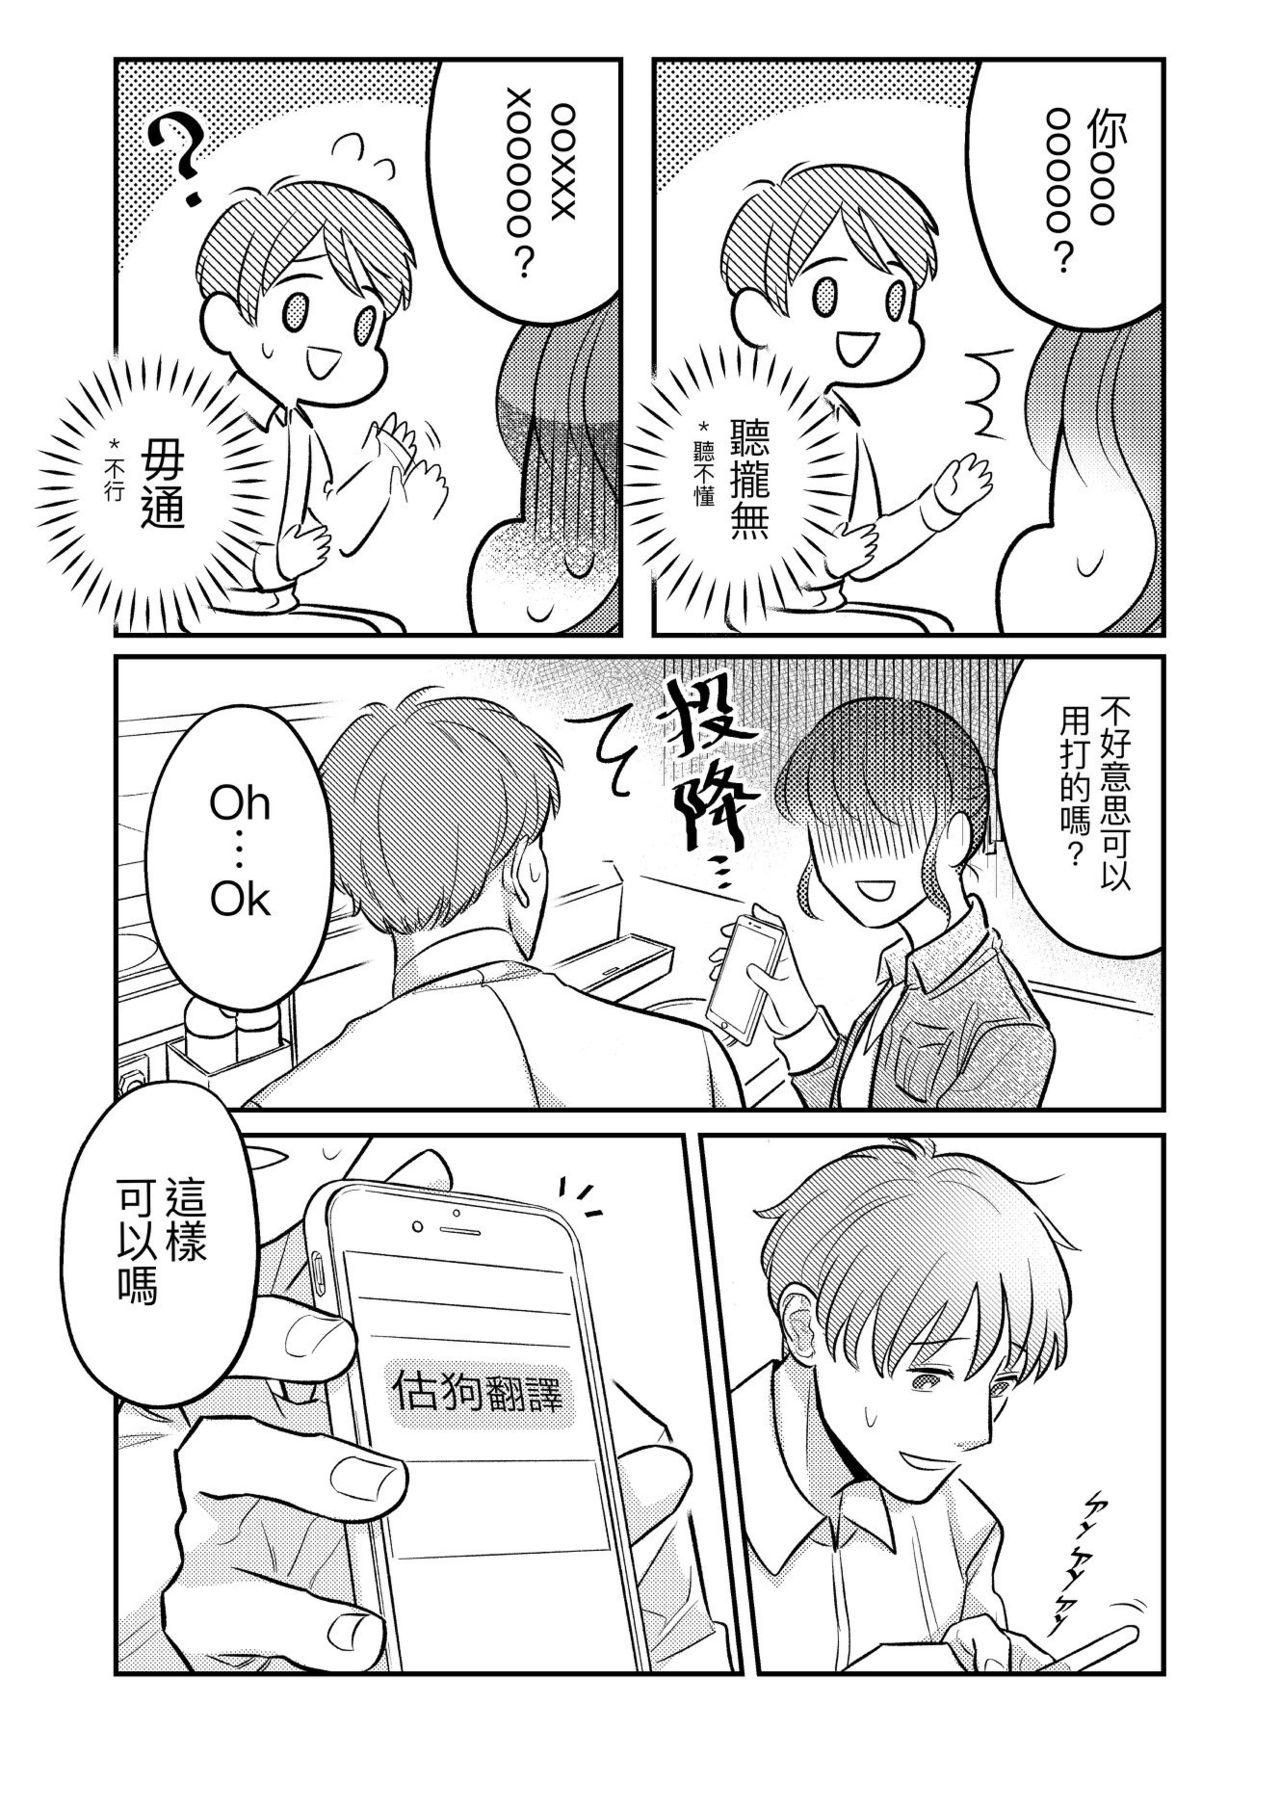 Women T子啪啪走2 | T-Chan's Sexual Journey 2 - Original Ball Sucking - Page 6